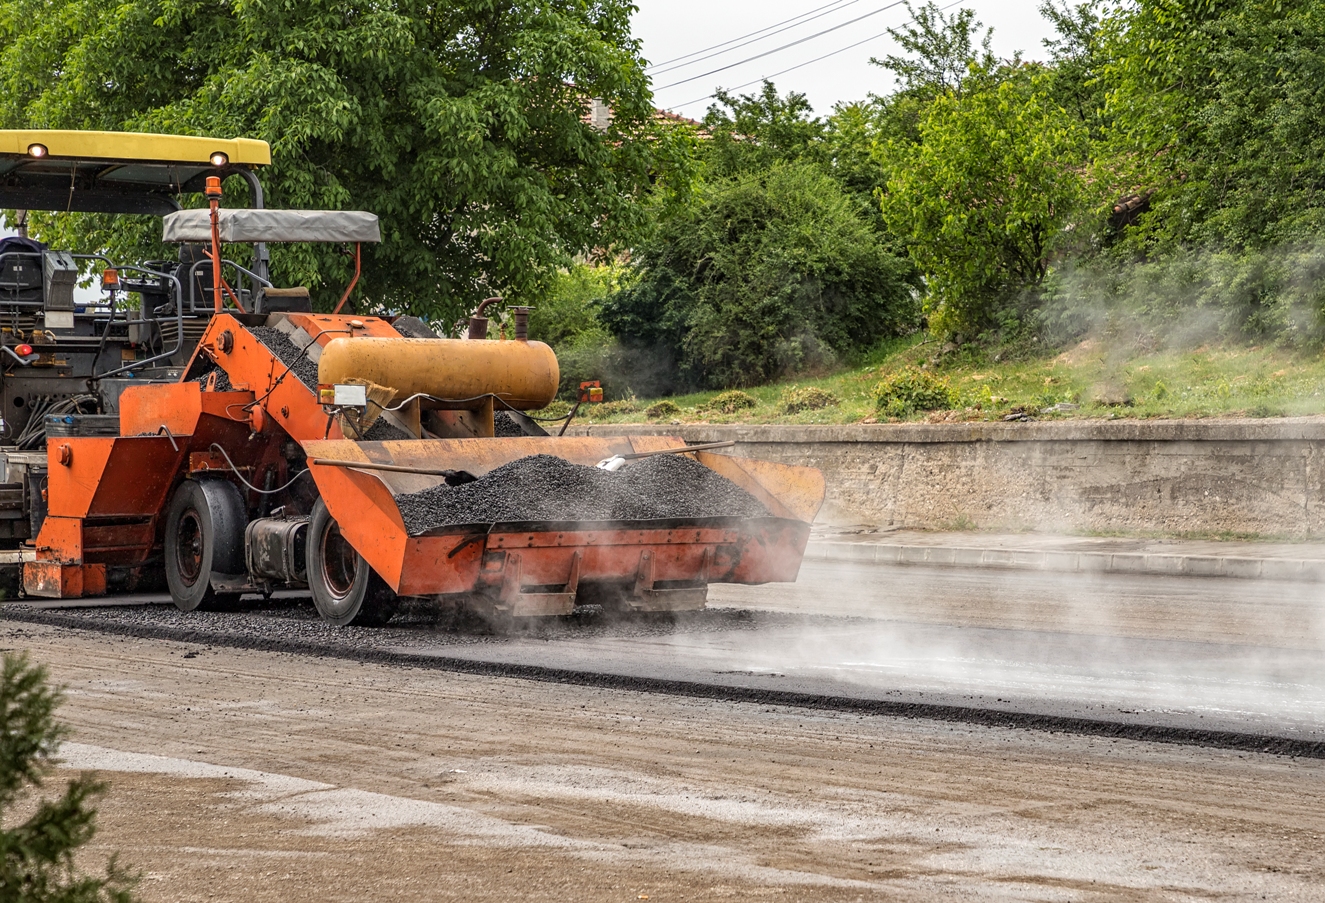 Asphalt paver machine makes a new road and repairing works. A paver finisher, asphalt finisher or paving machine placing a layer of asphalt. Repaving.